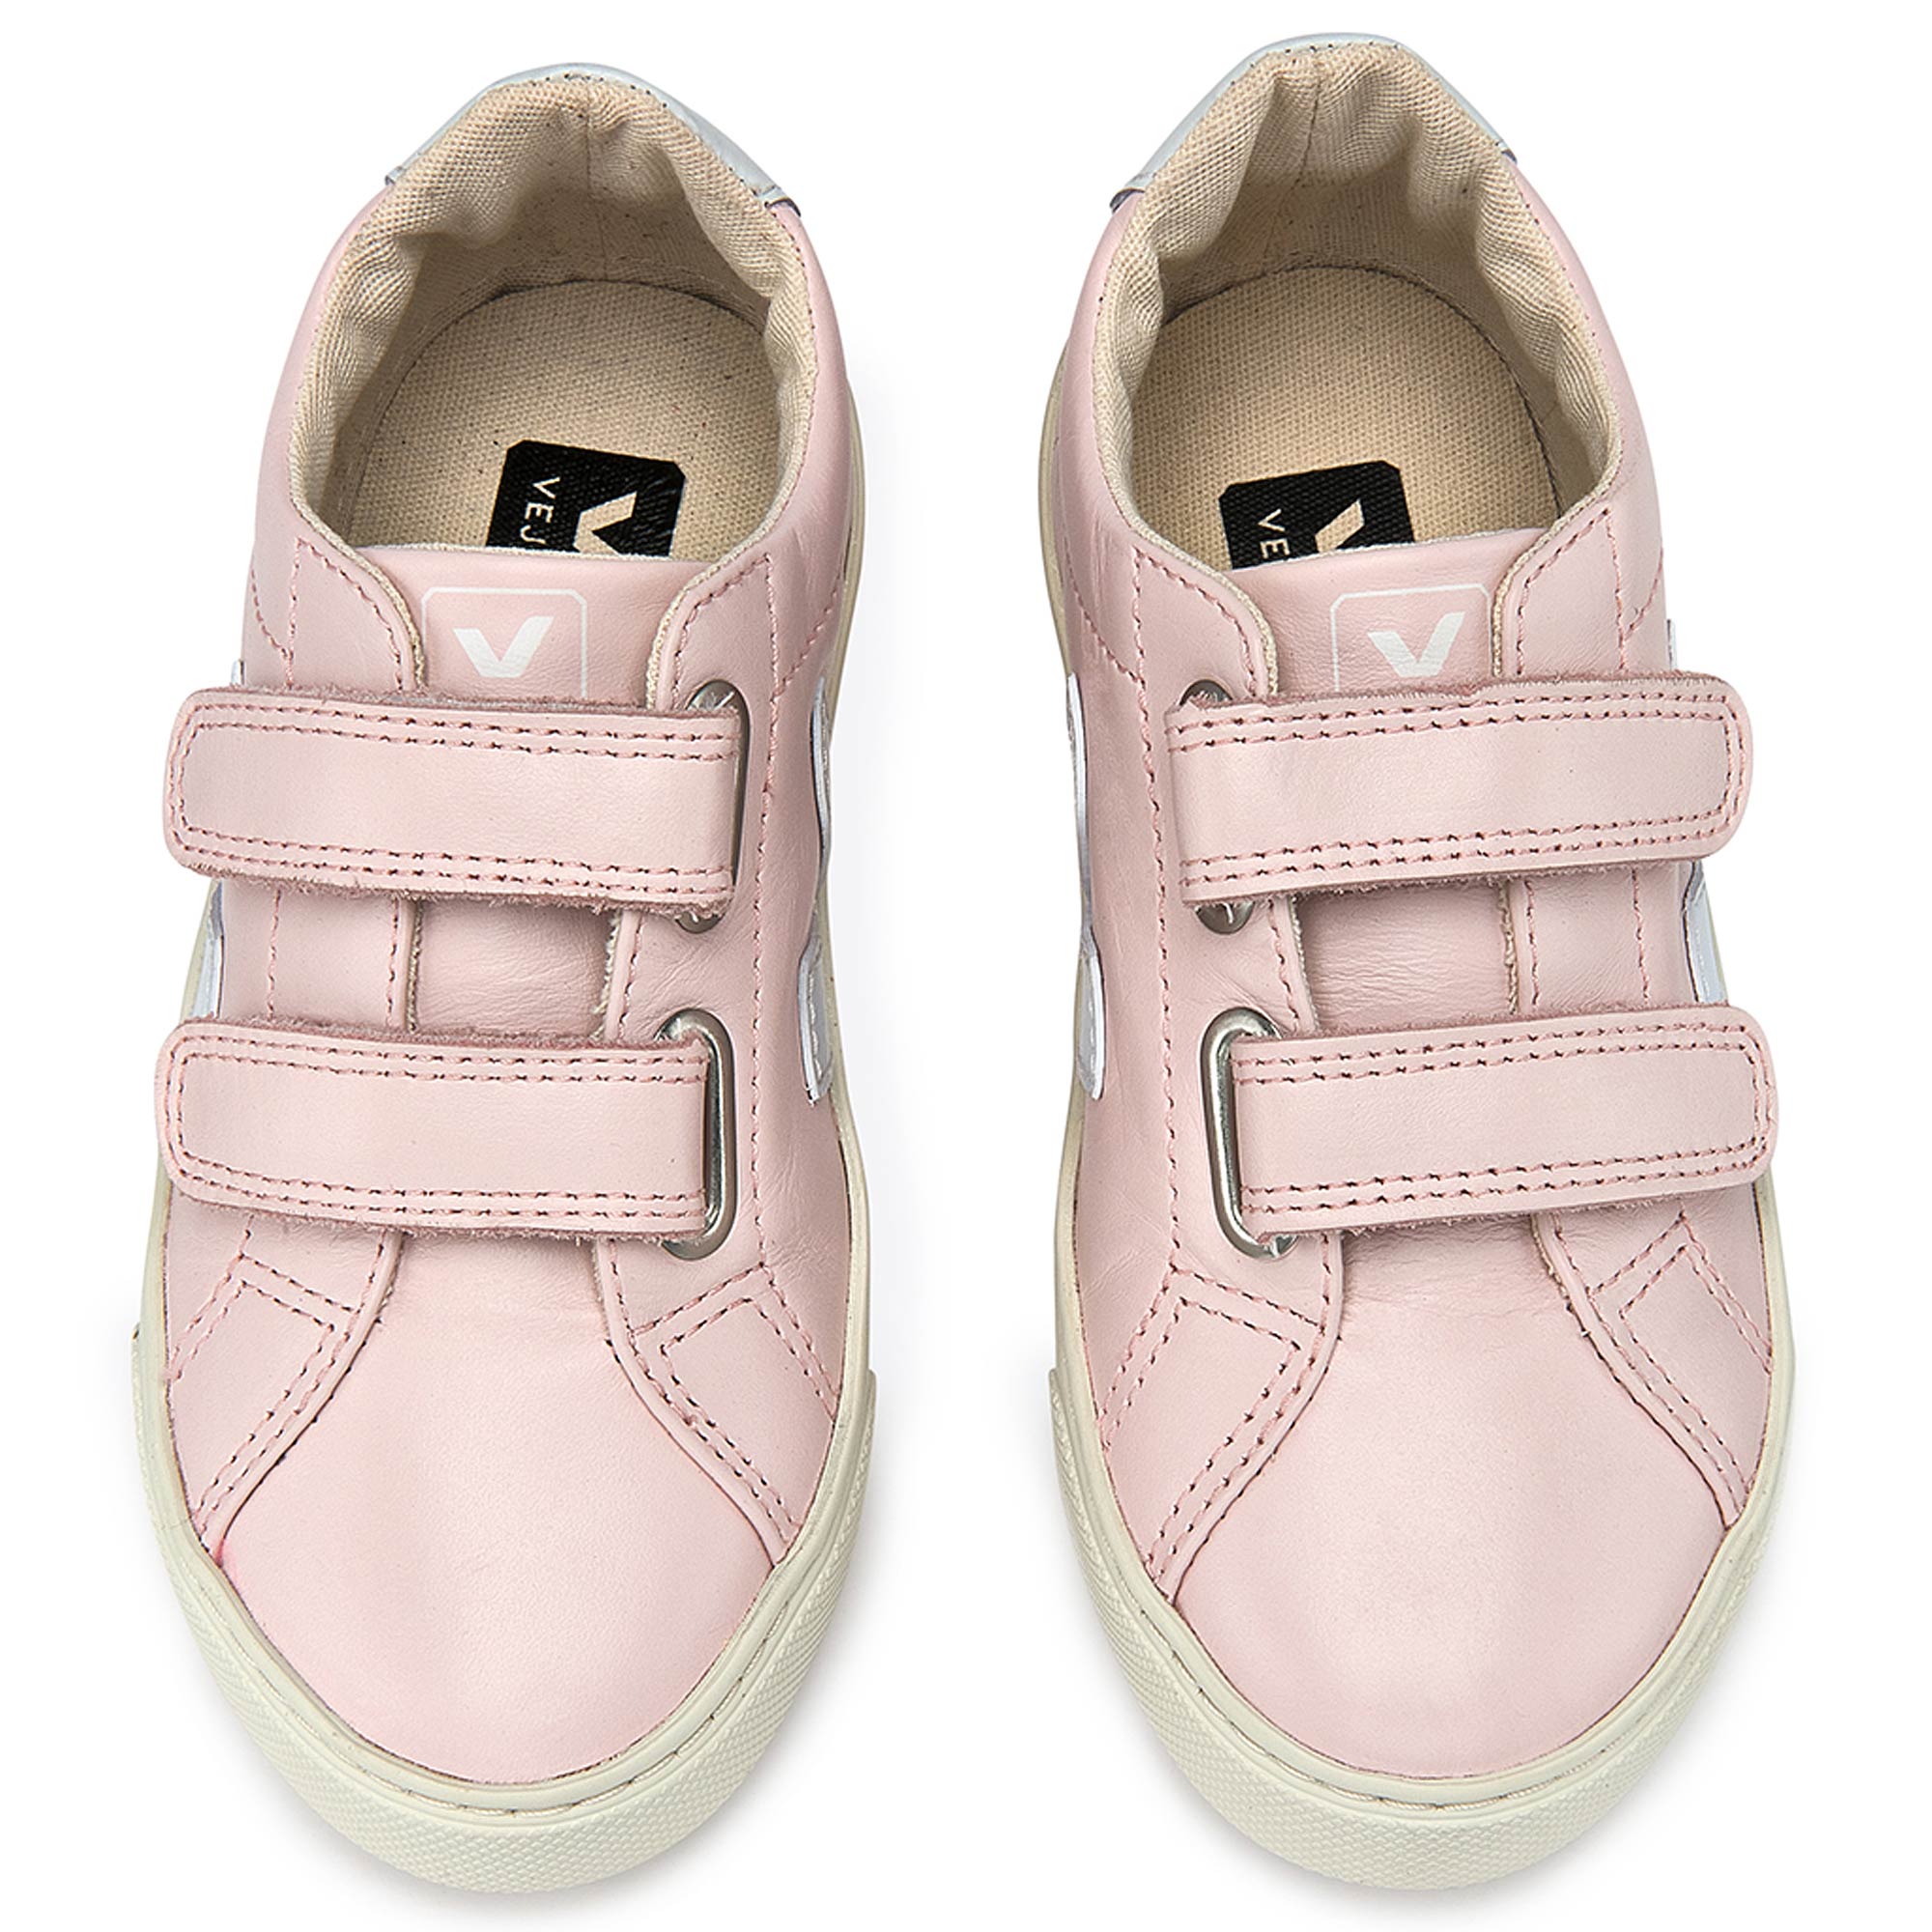 Girls  Pink   Leather Velcro   With  White  "V" Shoes